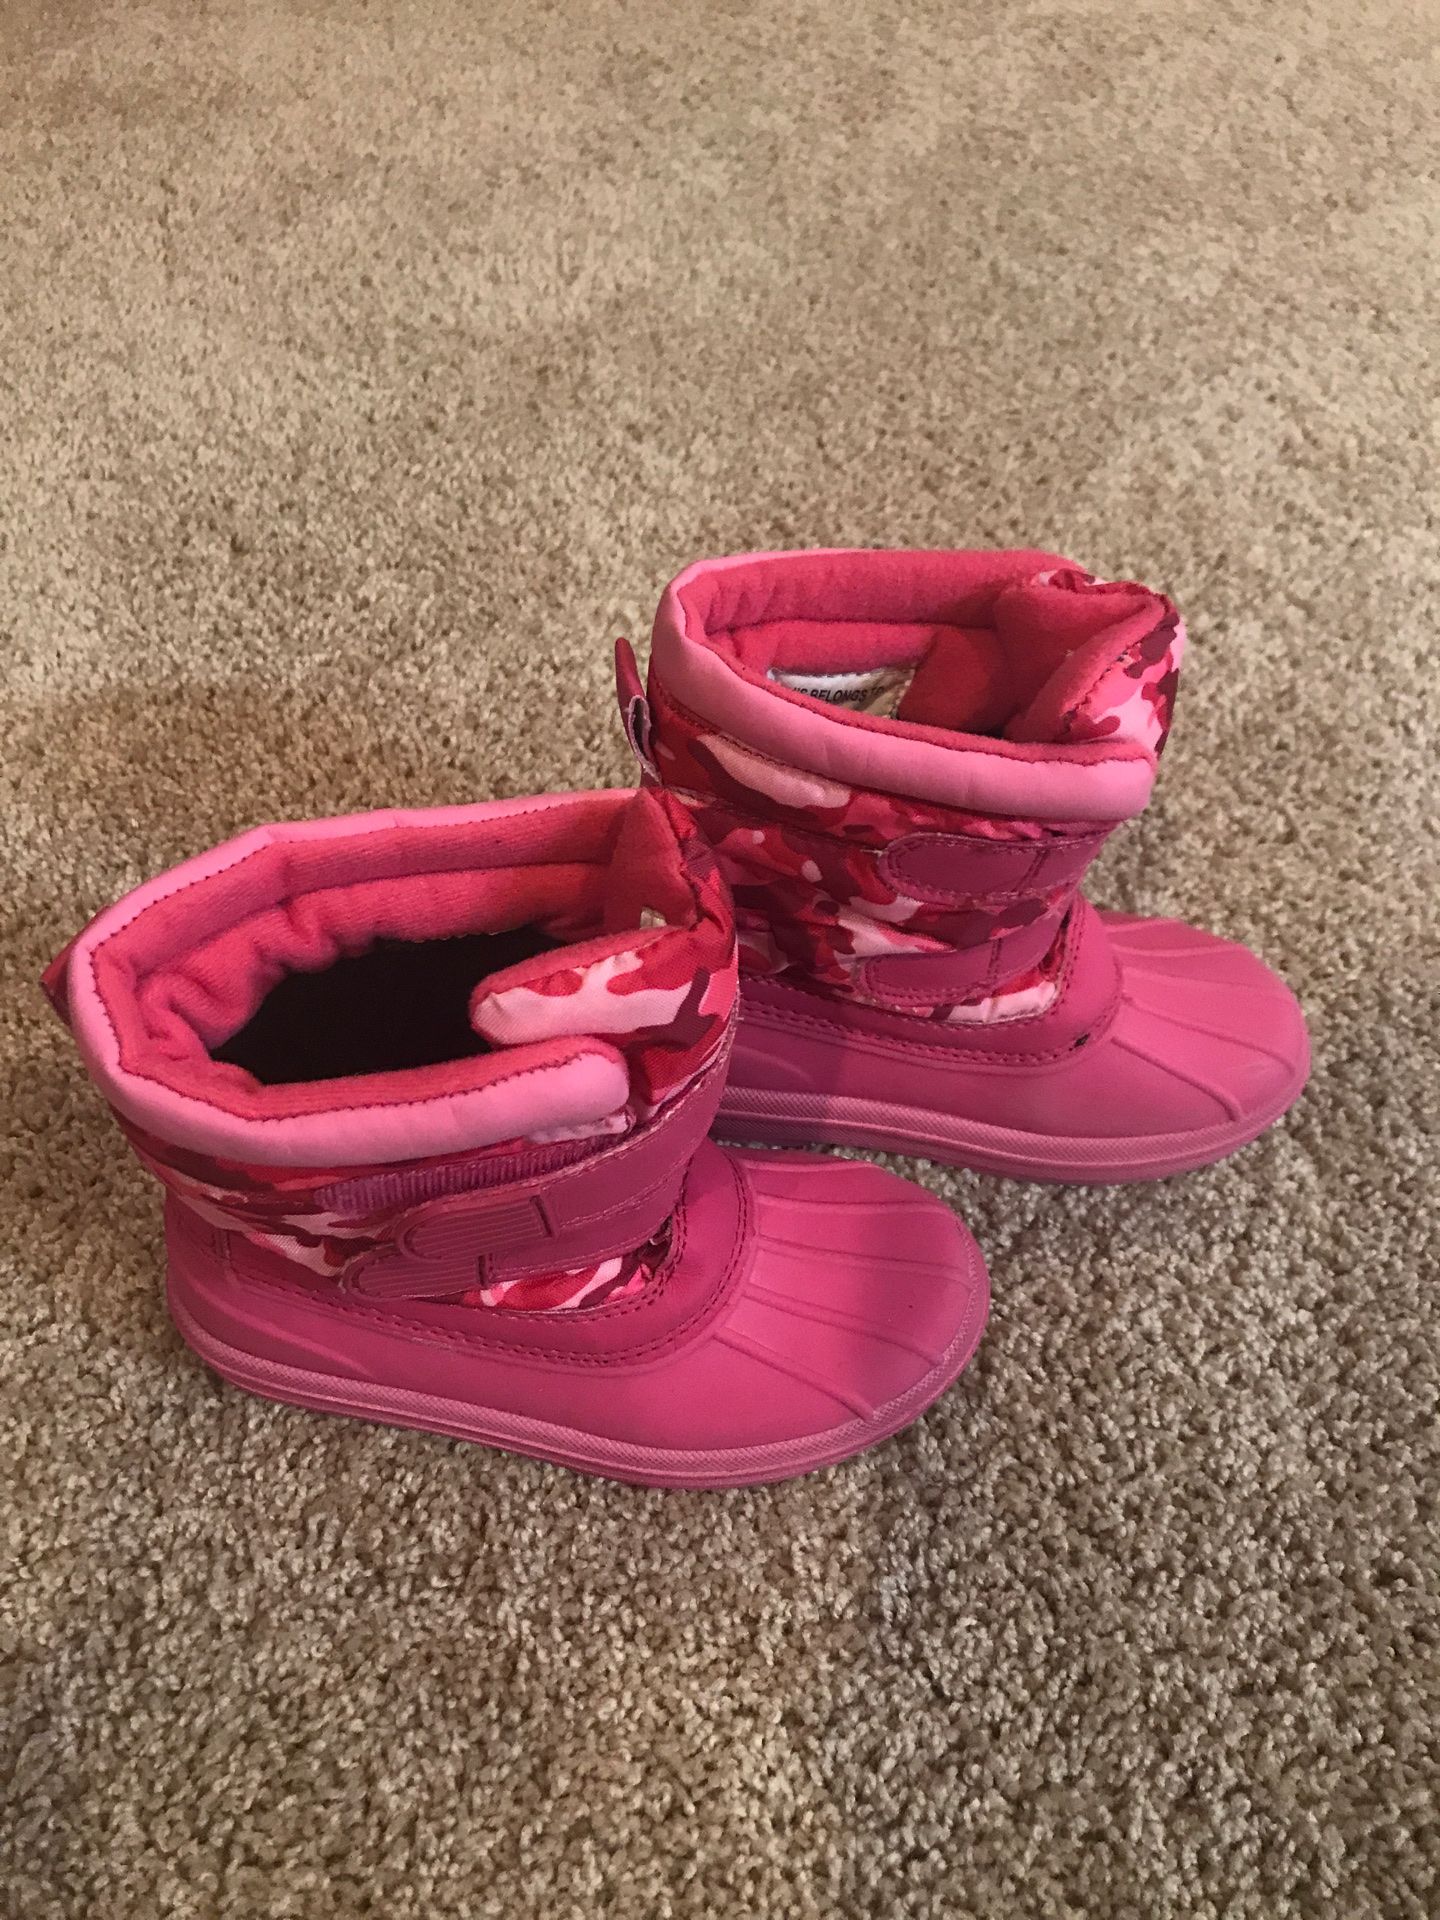 Target Girls Size 9/10 Pink Snow Boots